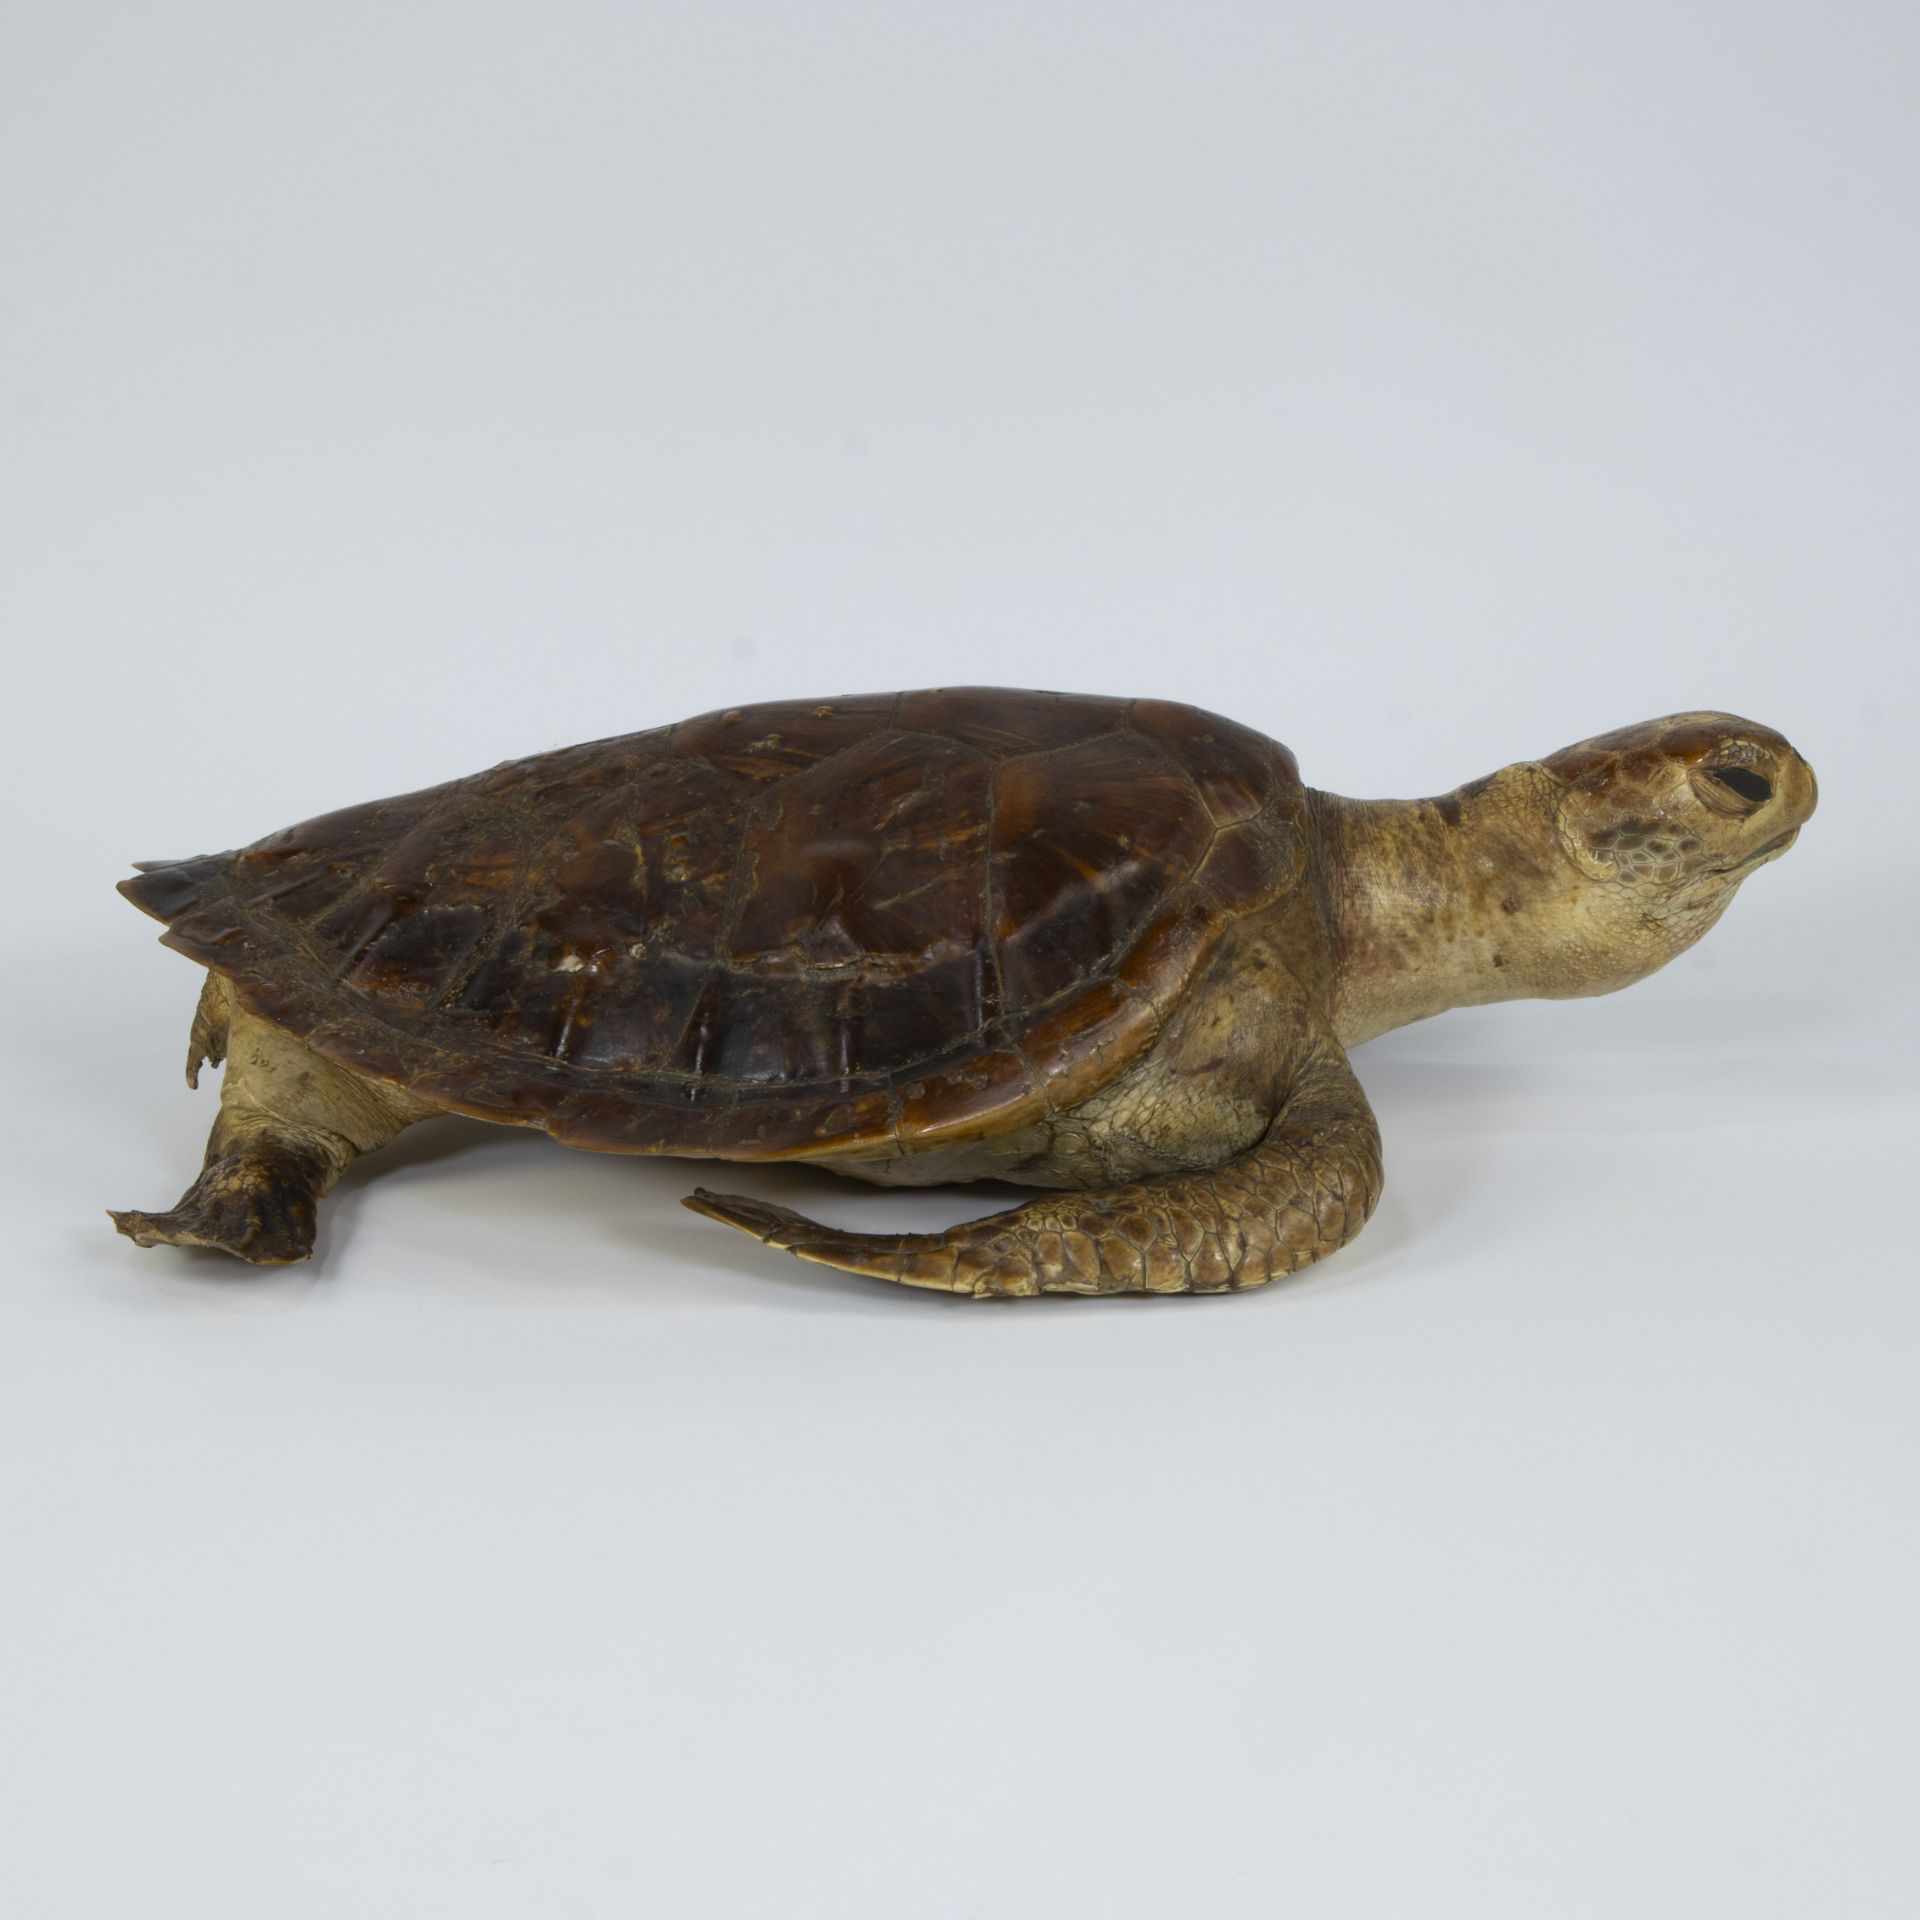 Water turtle - Image 4 of 5